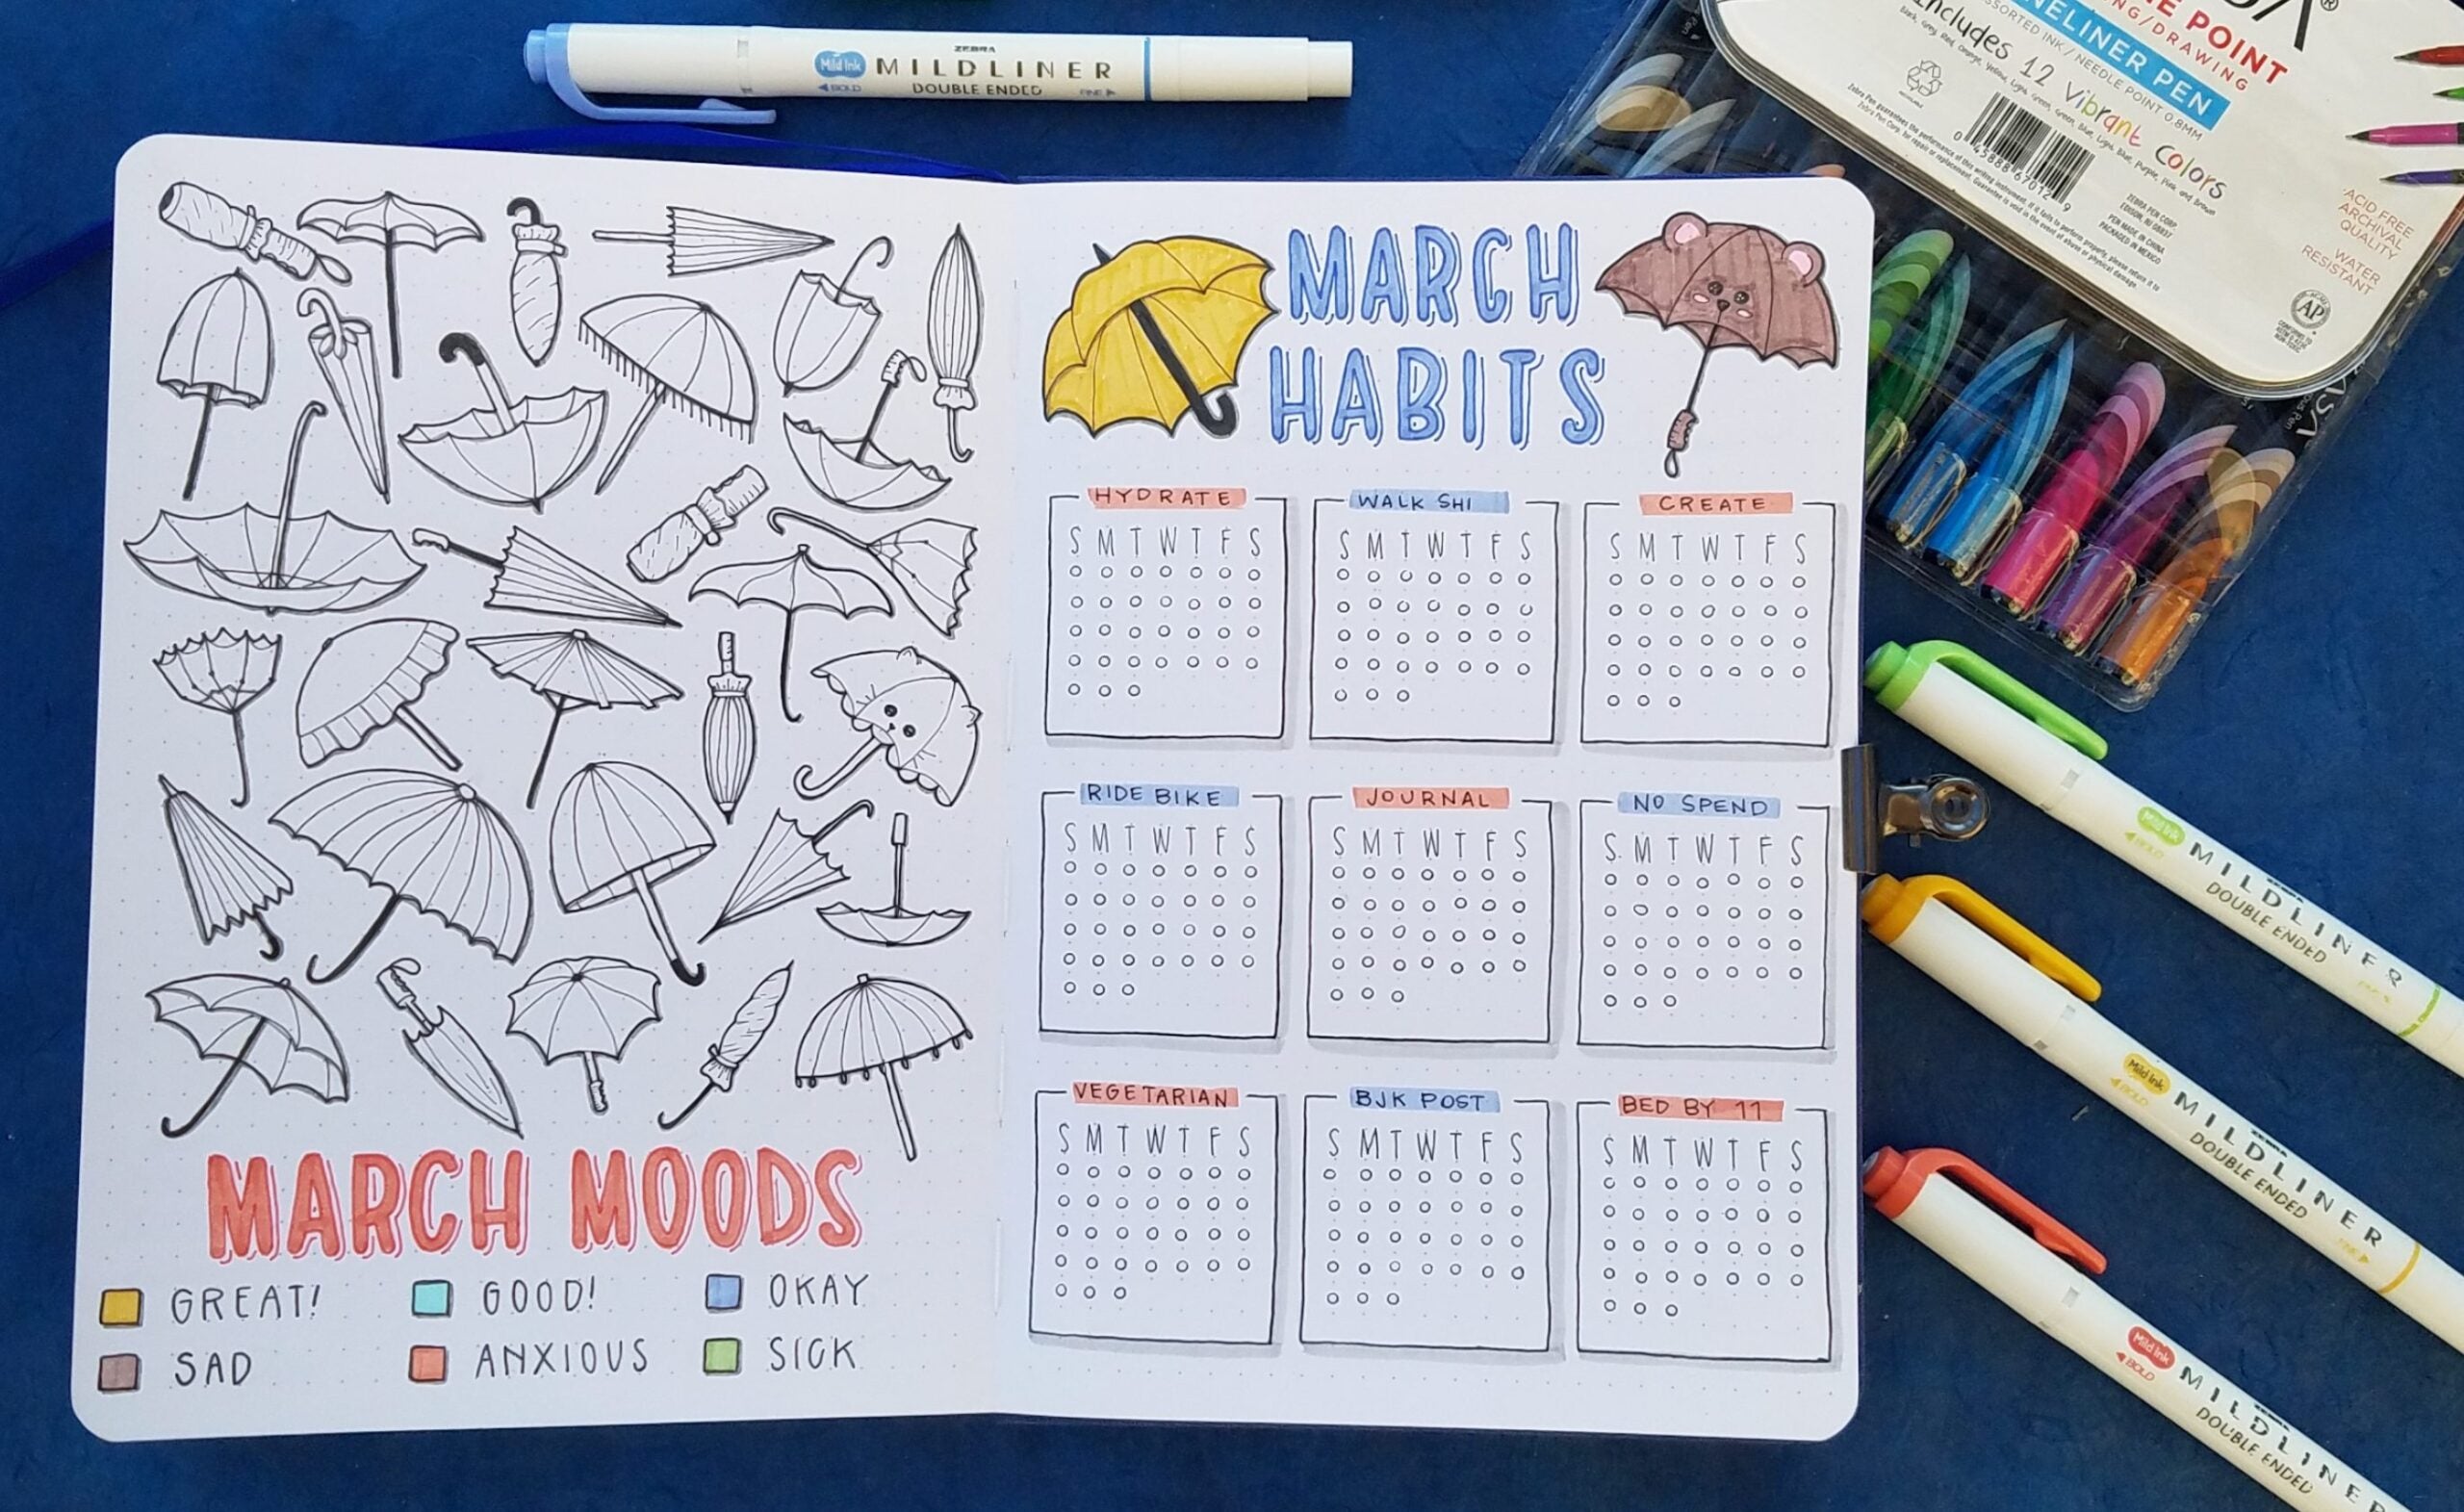 Bullet Journal Doodling - Make Drawing in Your Bullet Journal a Daily Habit